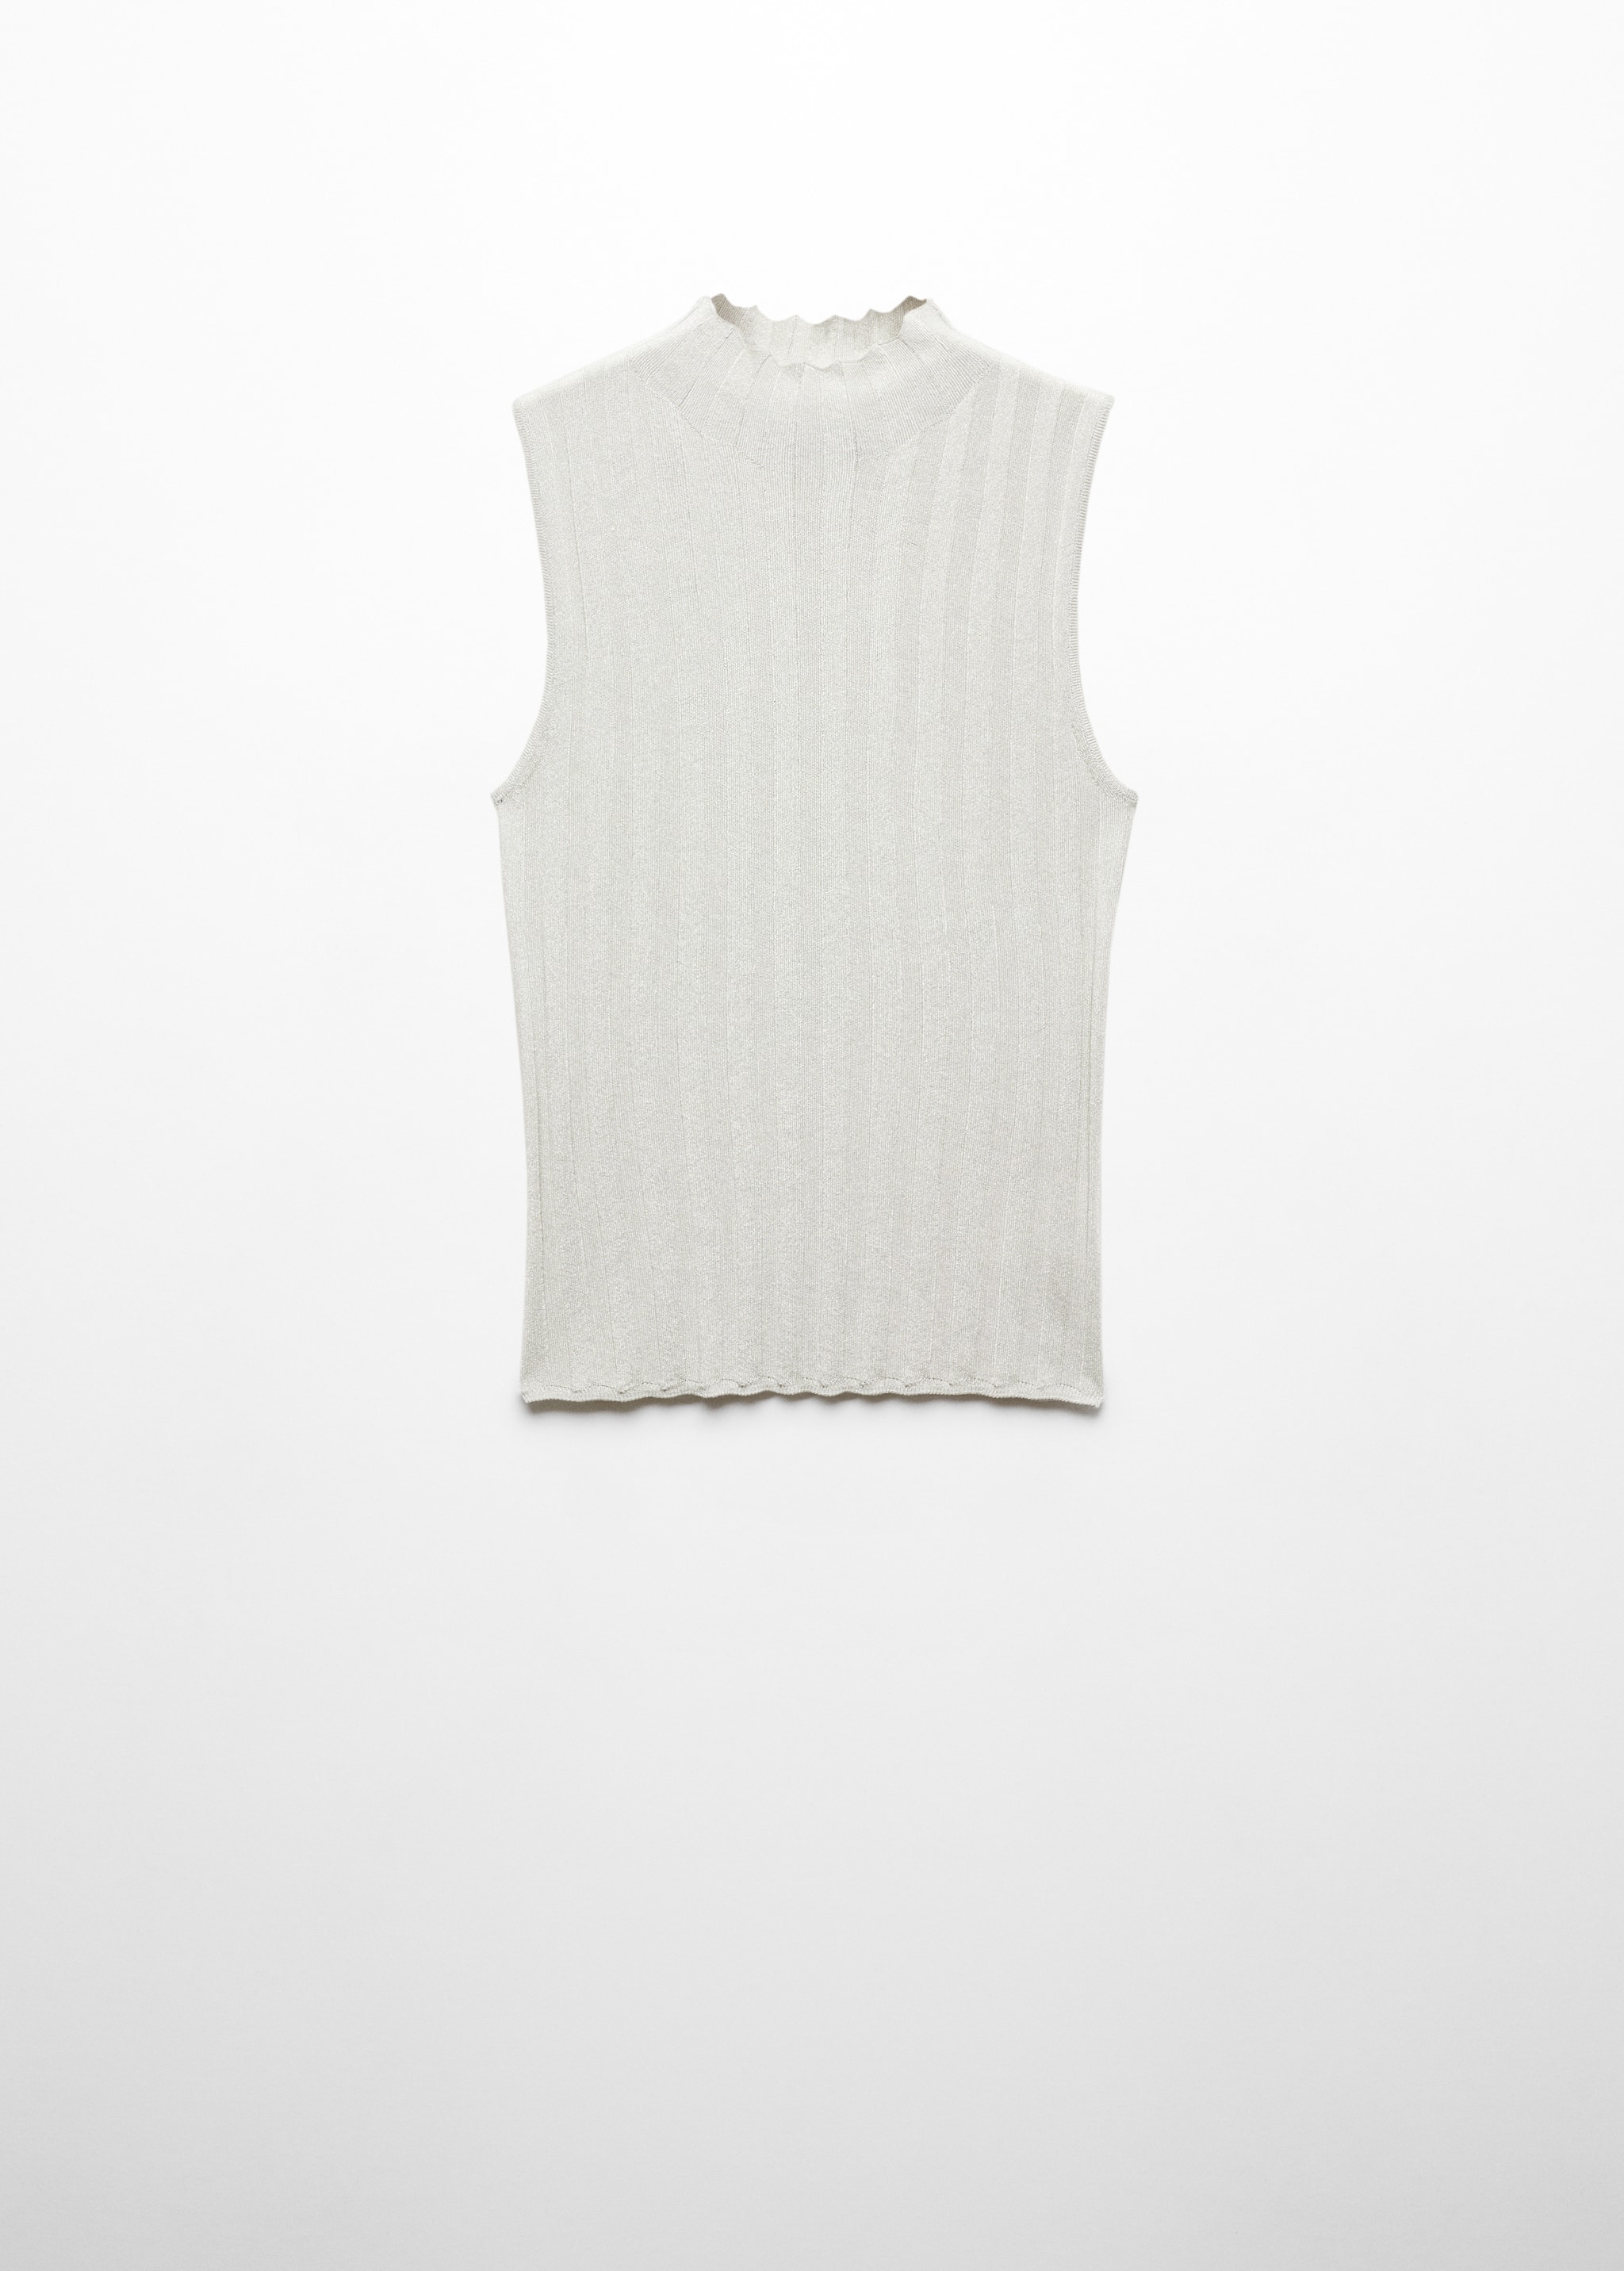 Turtleneck ribbed top - Article without model